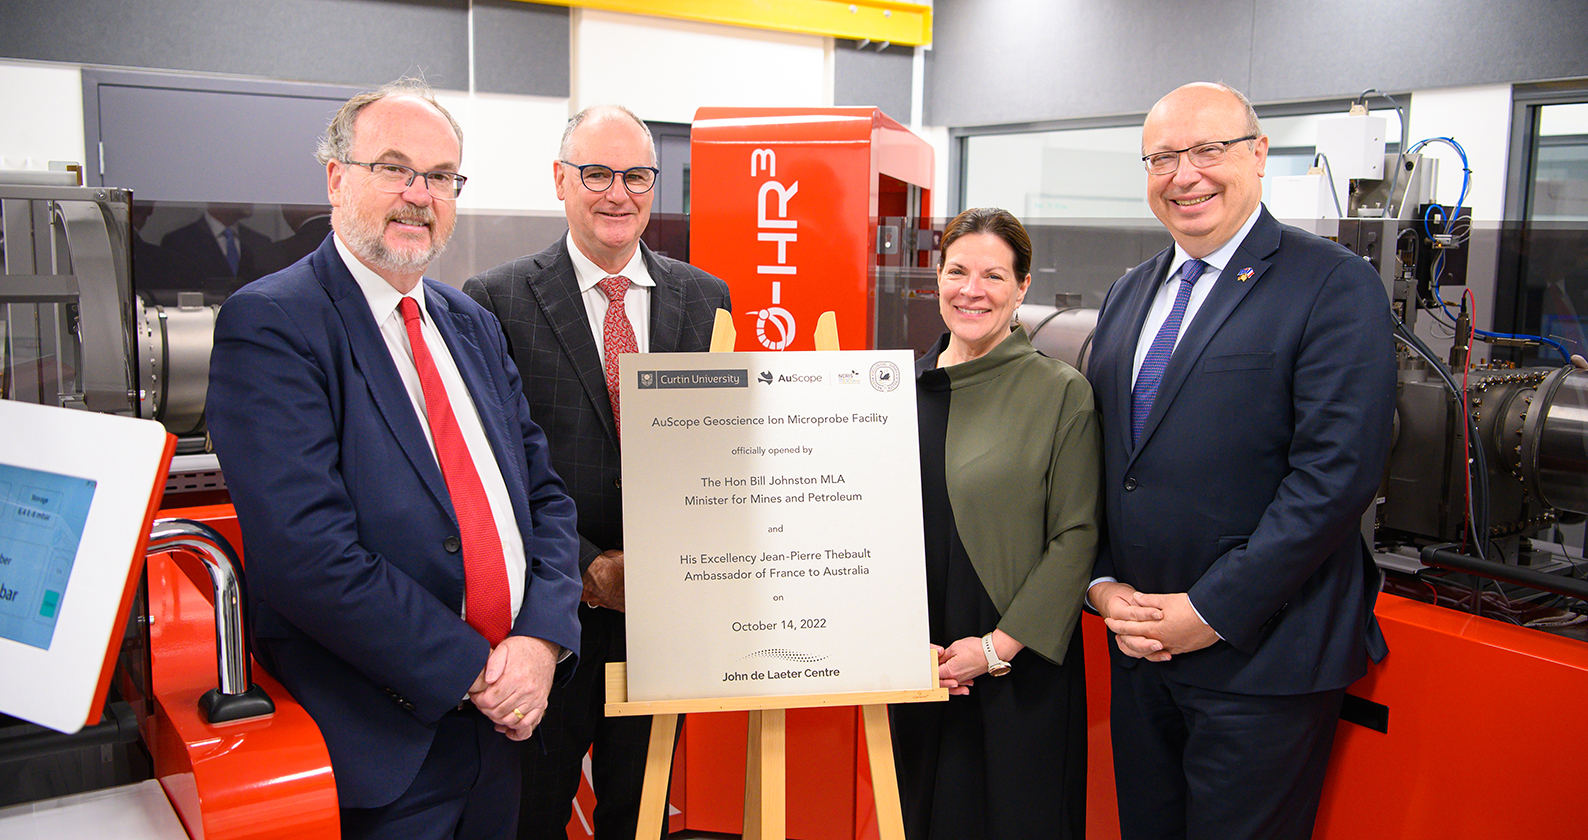 World-class research instrument takes up new home at Curtin